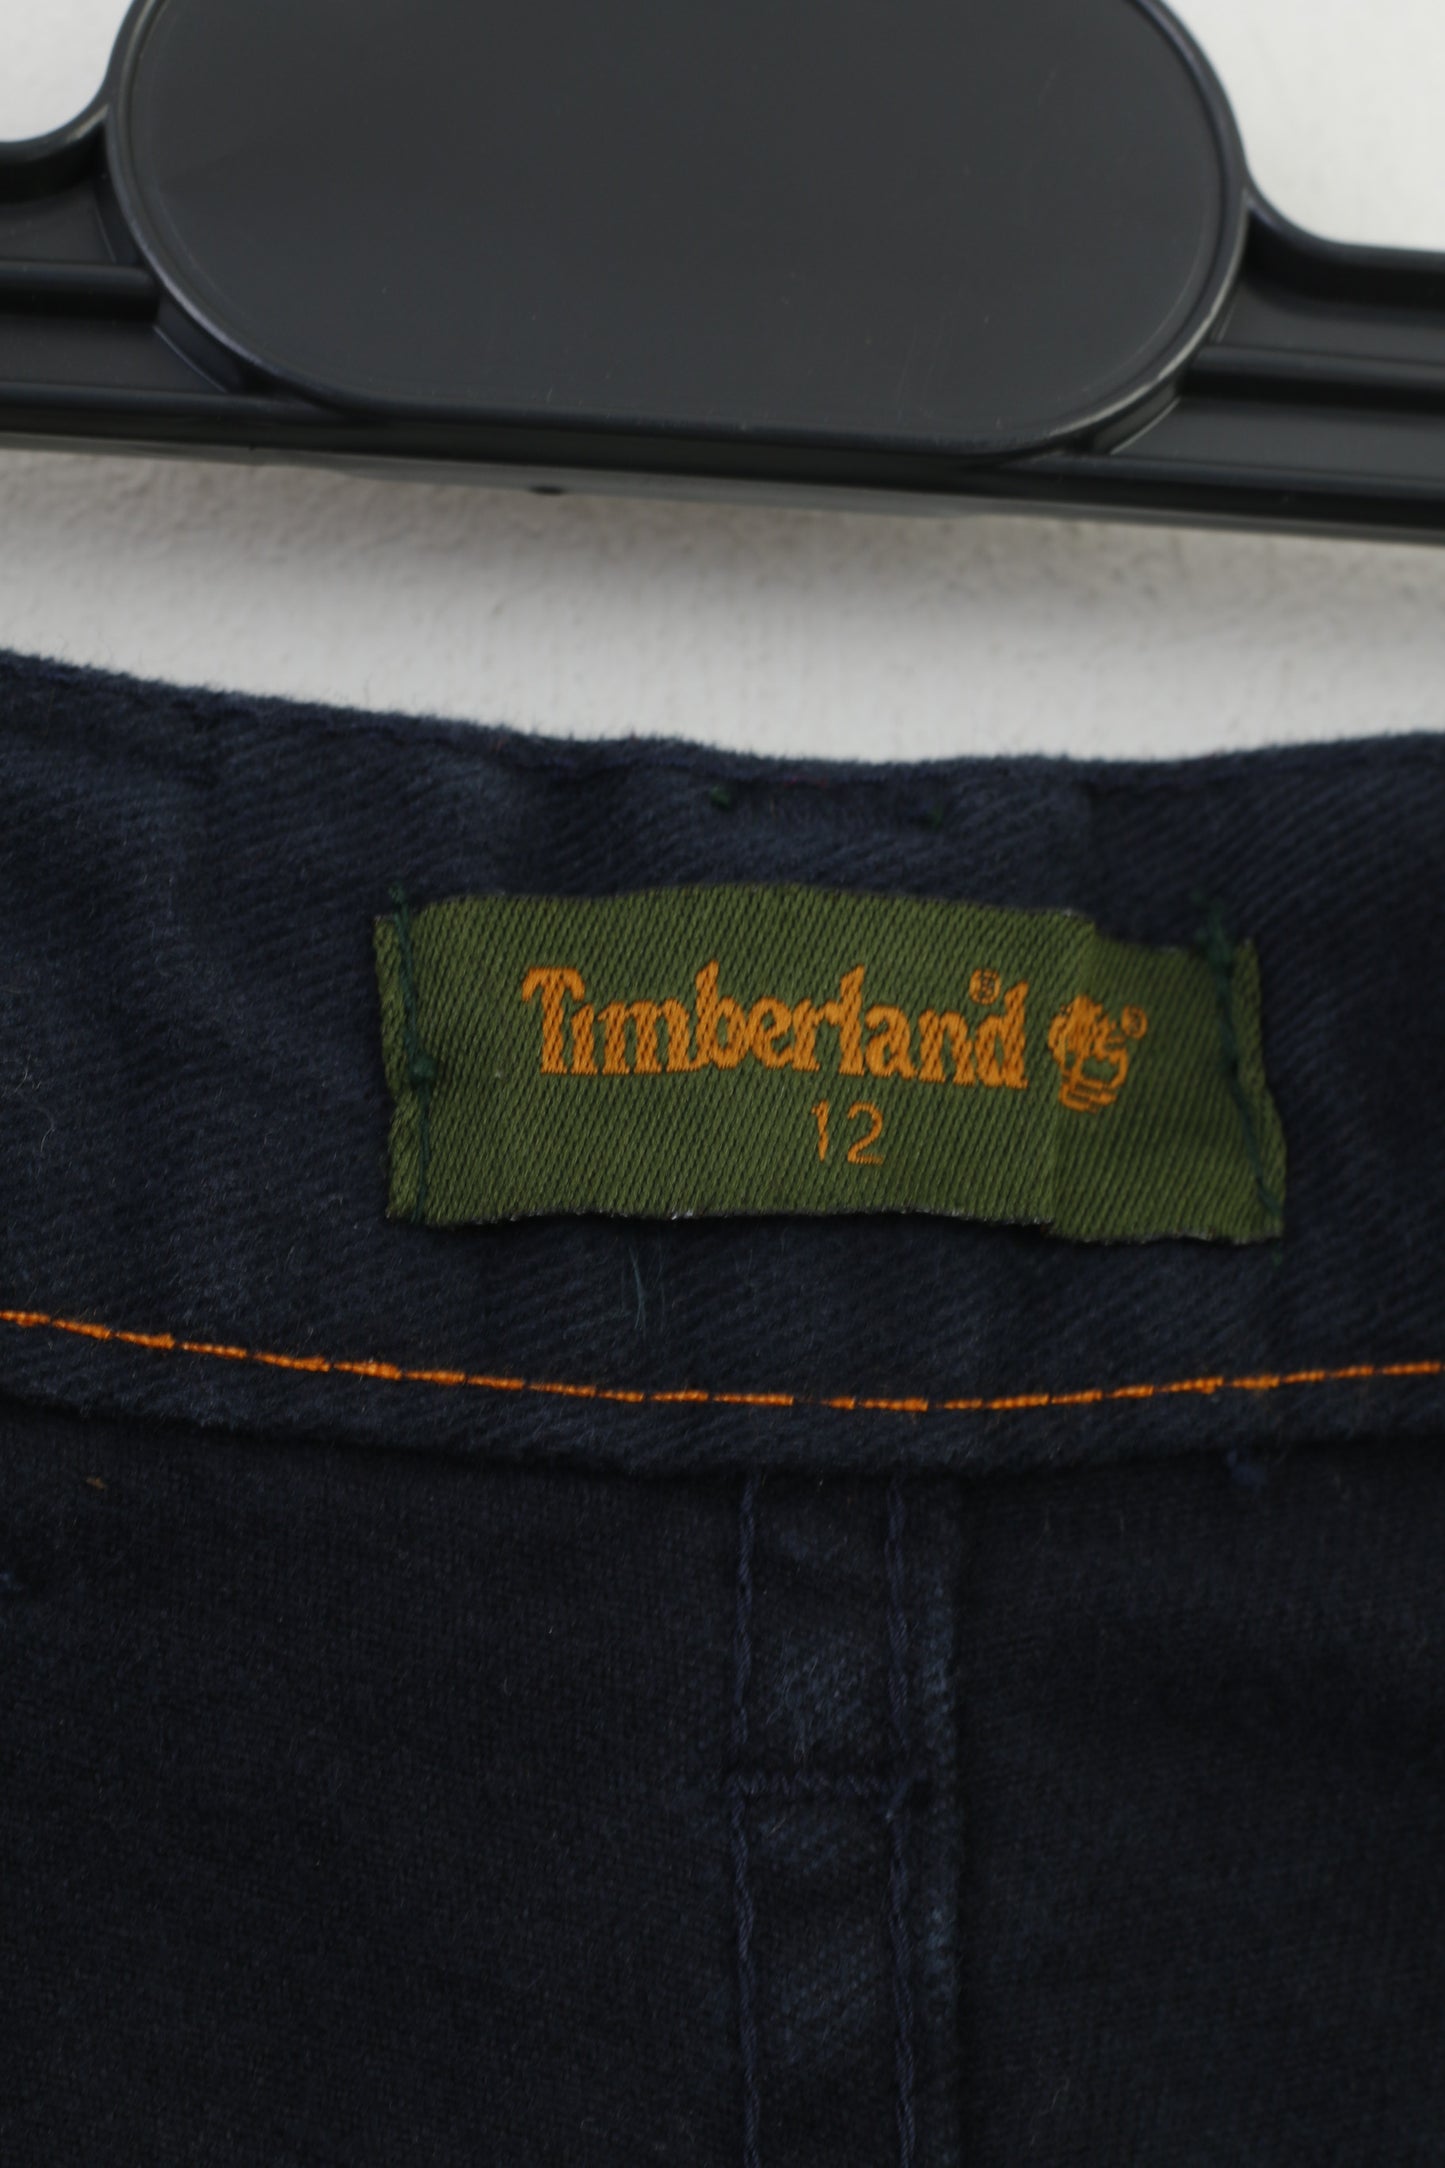 Timberland Boys 12 Age Trousers Navy Cotton Vintage Jeans Pants